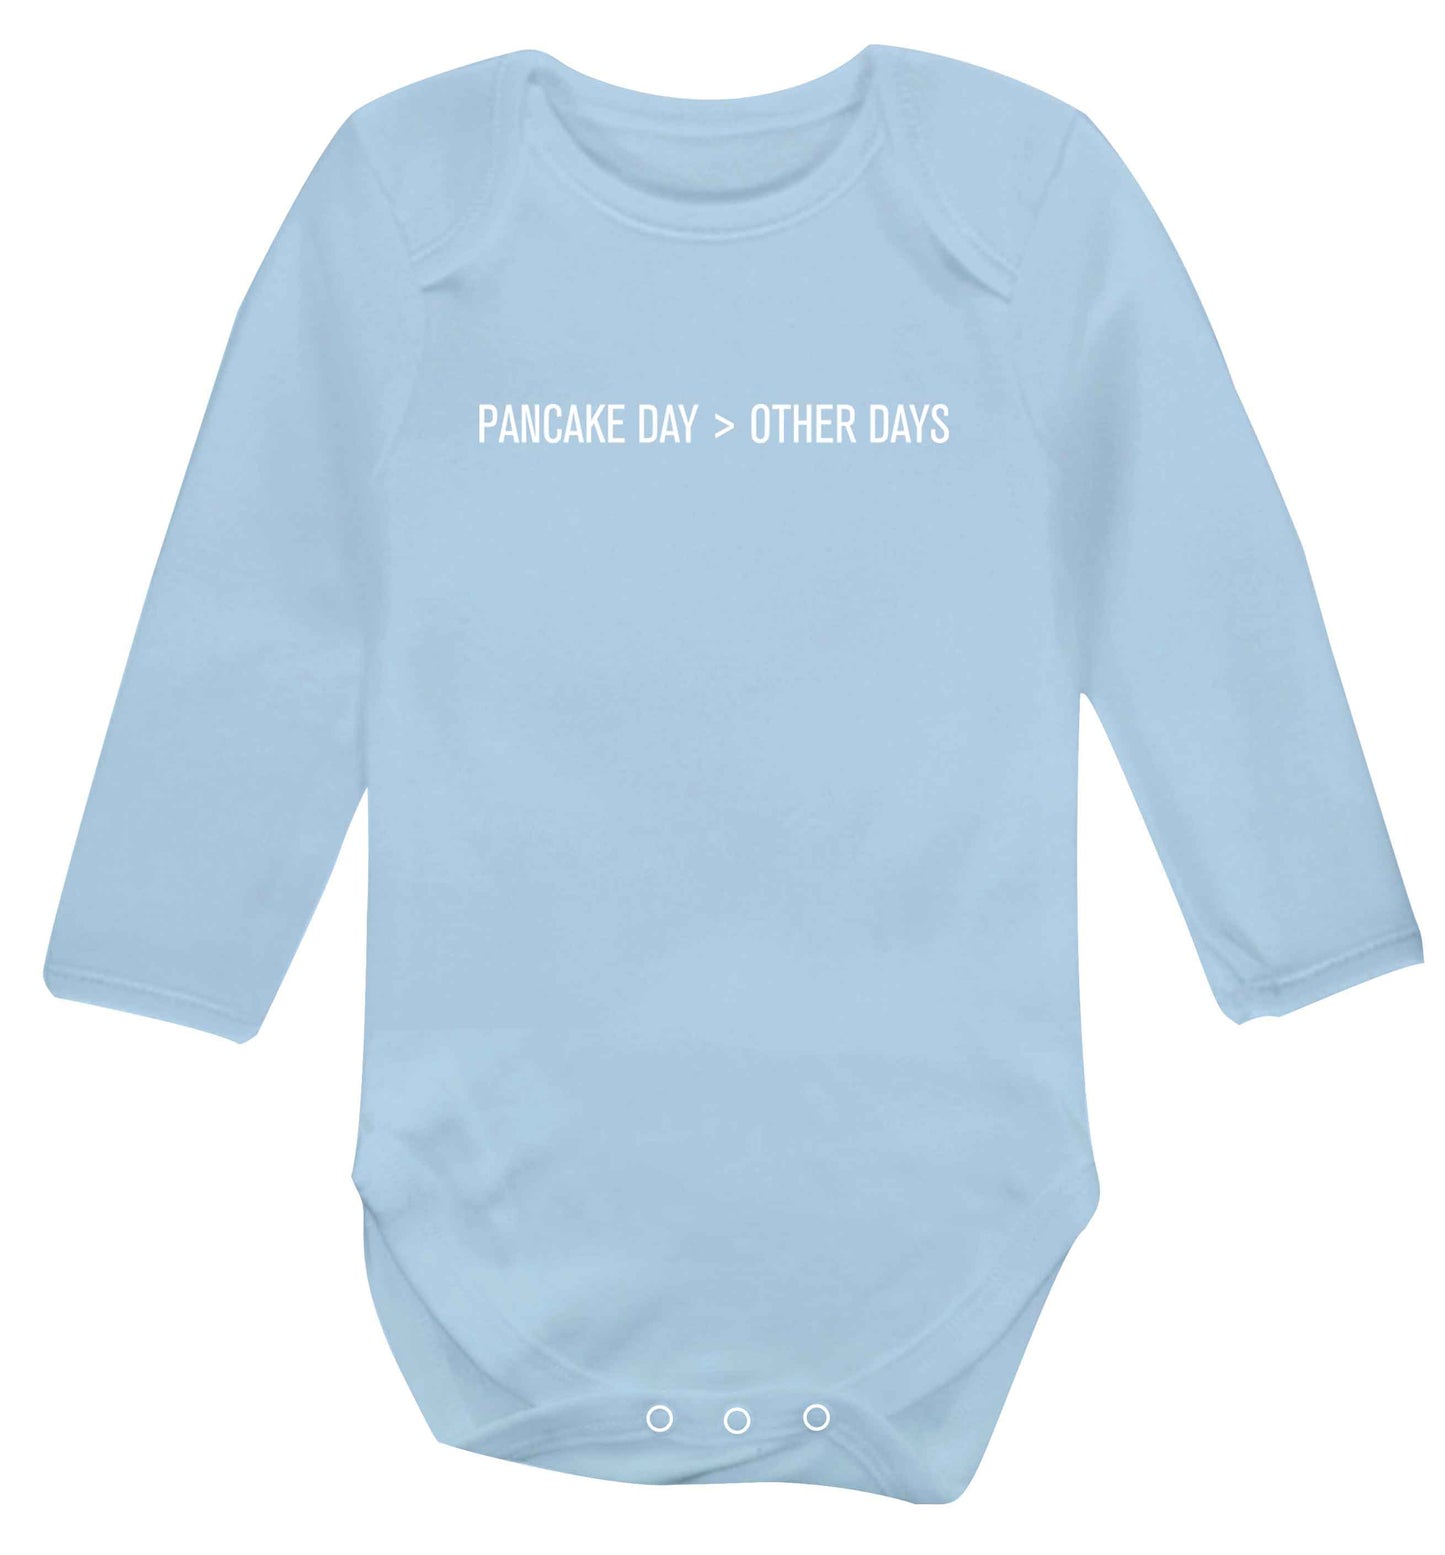 Pancake day > other days baby vest long sleeved pale blue 6-12 months